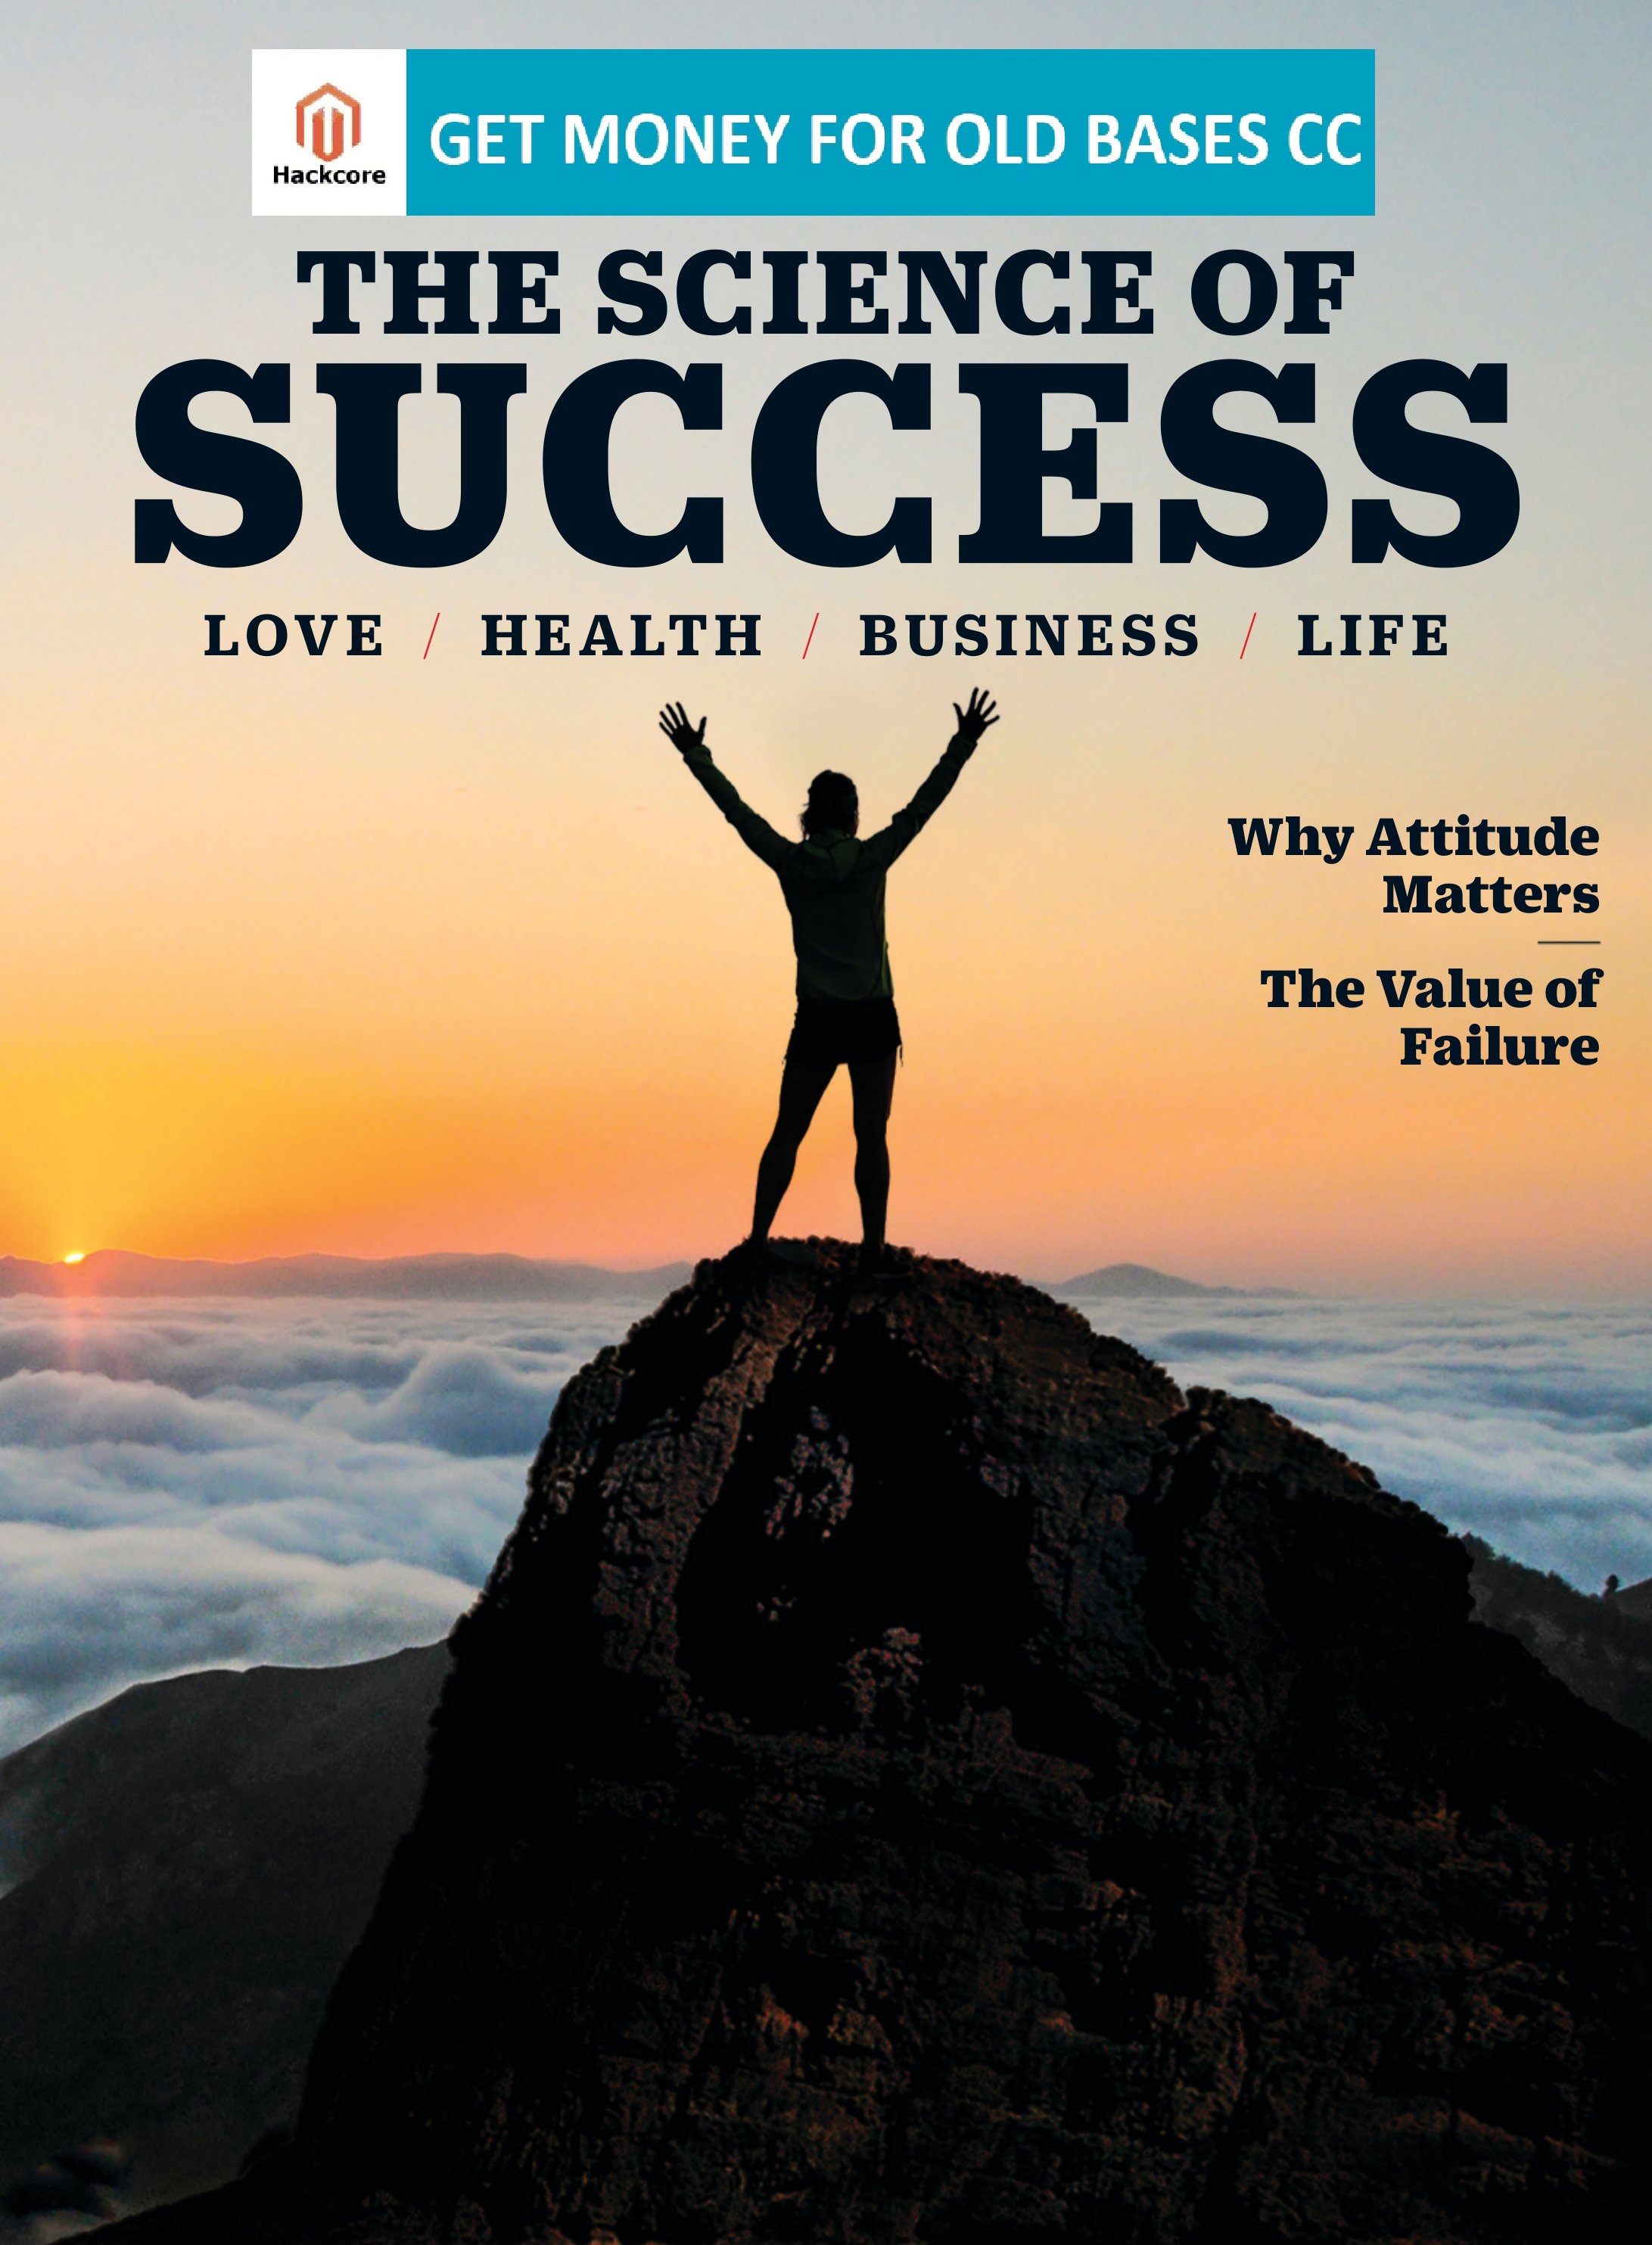 time-special-edition-the-science-of-success-2019_downmagazcom-001.jpg